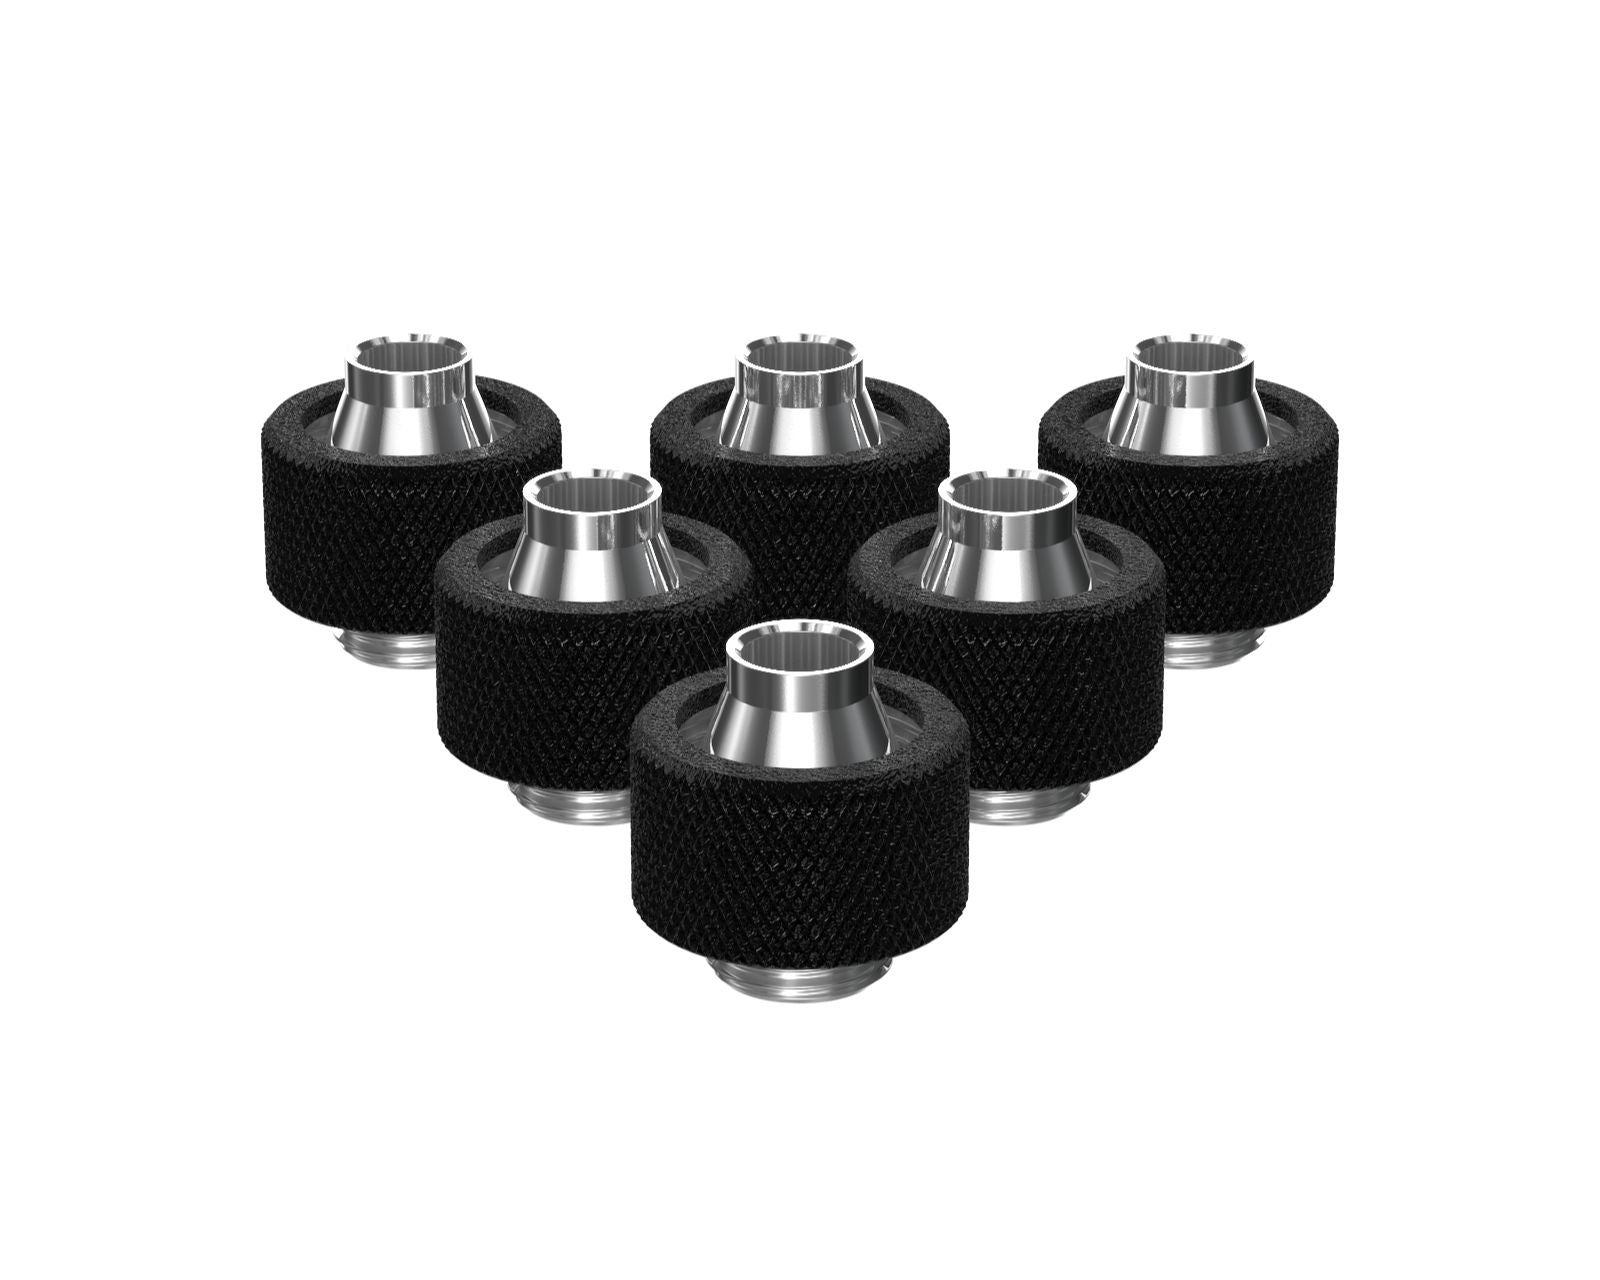 PrimoChill SecureFit SX - Premium Compression Fitting For 3/8in ID x 5/8in OD Flexible Tubing 6 Pack (F-SFSX58-6) - Available in 20+ Colors, Custom Watercooling Loop Ready - TX Matte Black